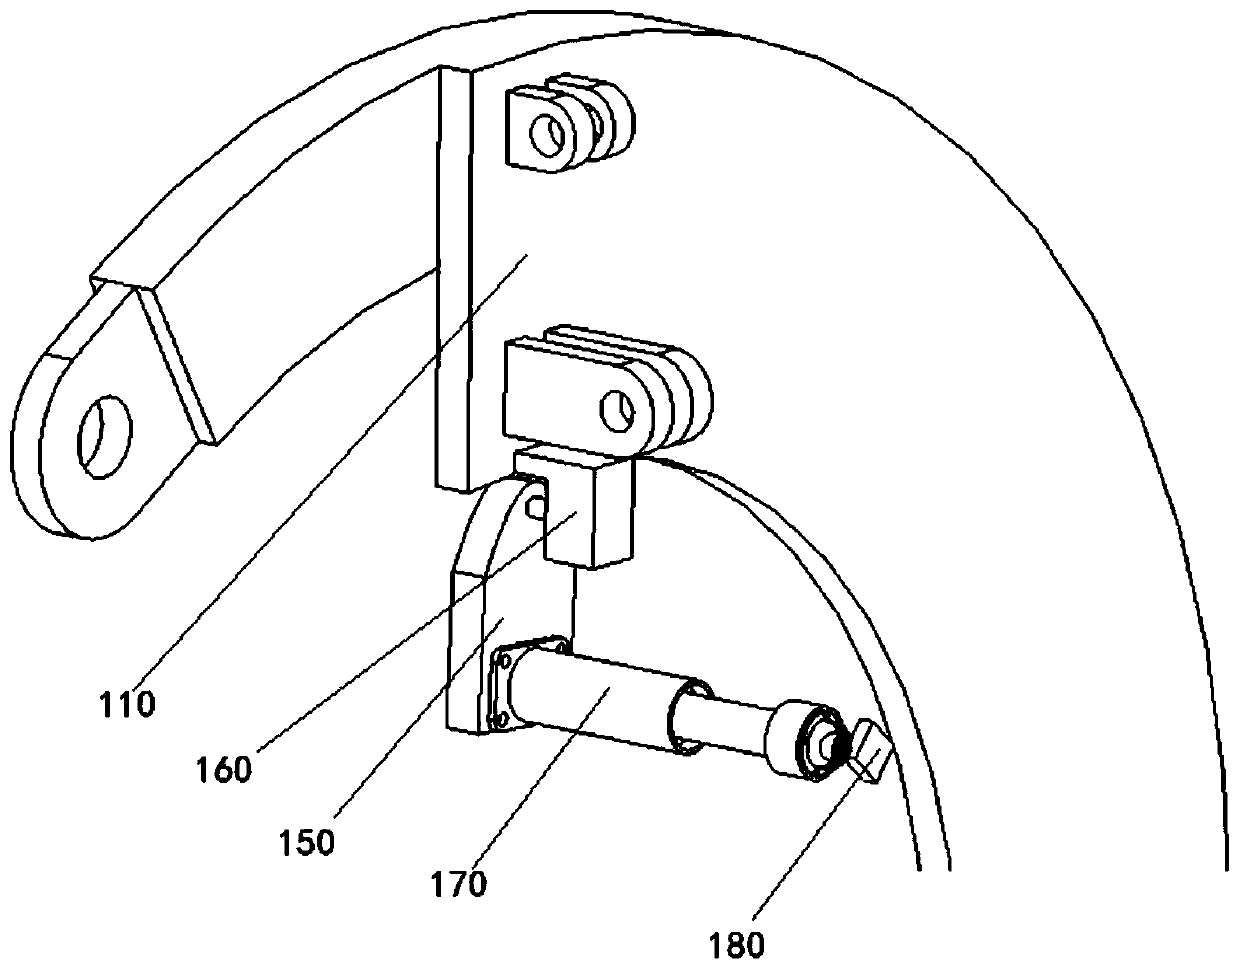 Guiding and positioning device used for aerial docking of fan impeller assembly and cabin